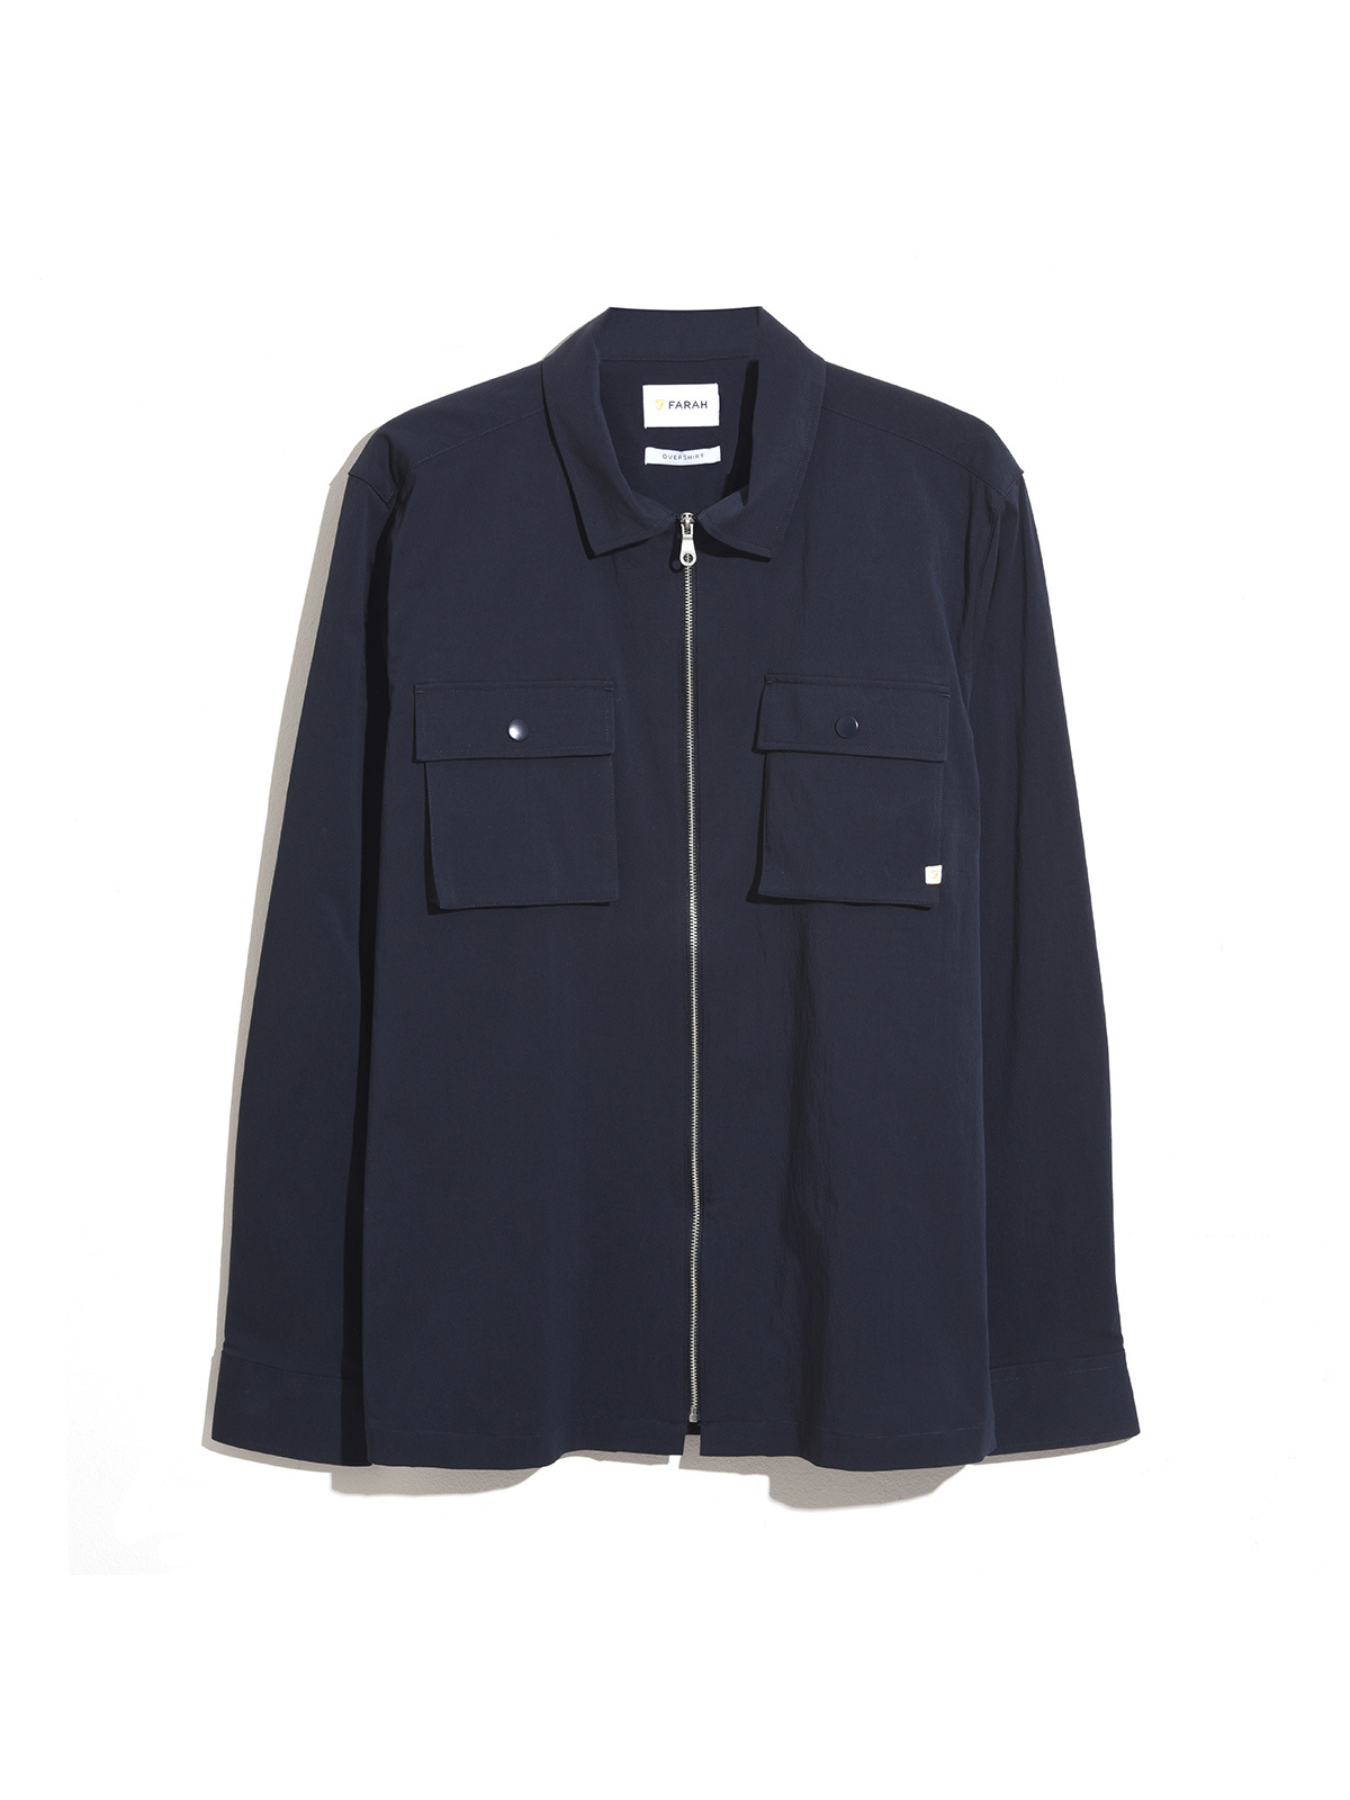 View Lynden Relaxed Fit Long Sleeve Shirt In True Navy information